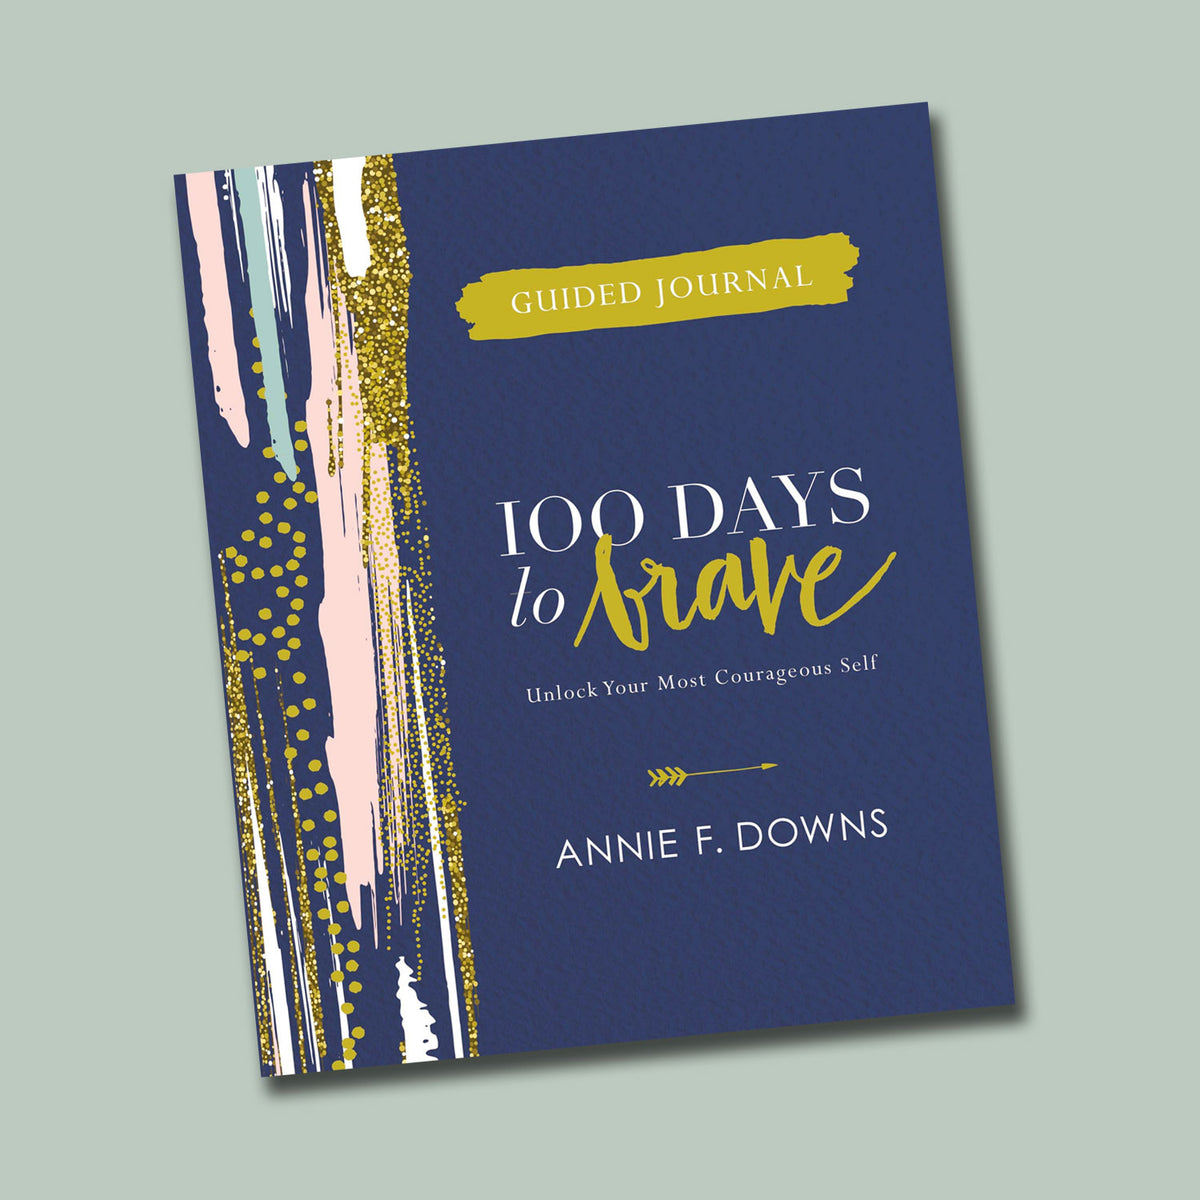 Journal–　F.　Downs　To　Guided　Brave:　Annie　100　Days